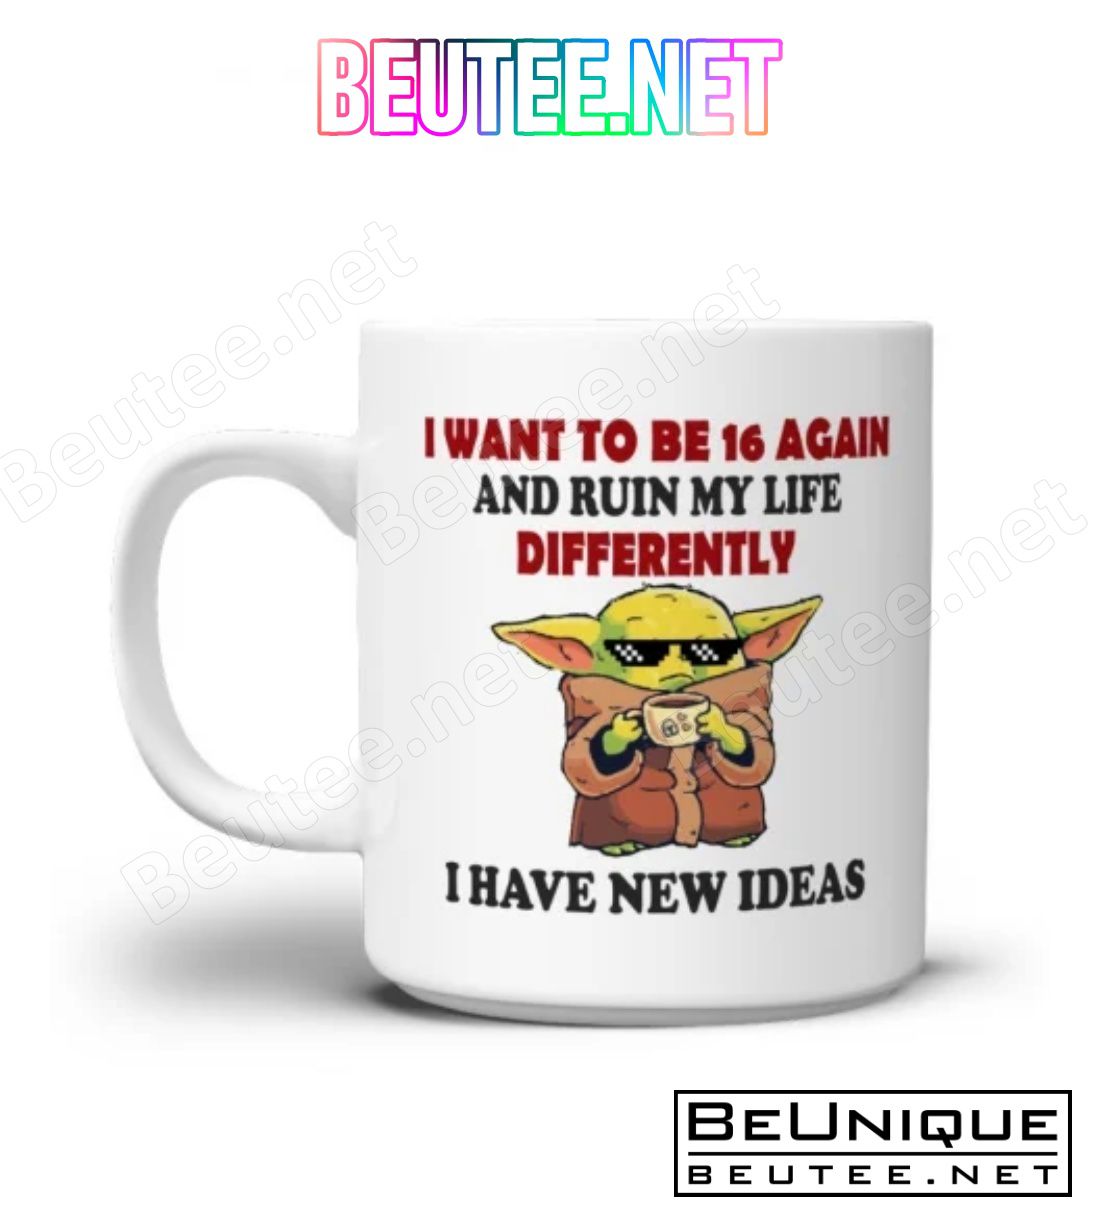 Baby Yoda I Want To Be A 16 Again And Ruin My Life Differently I Have New Ideas Mug